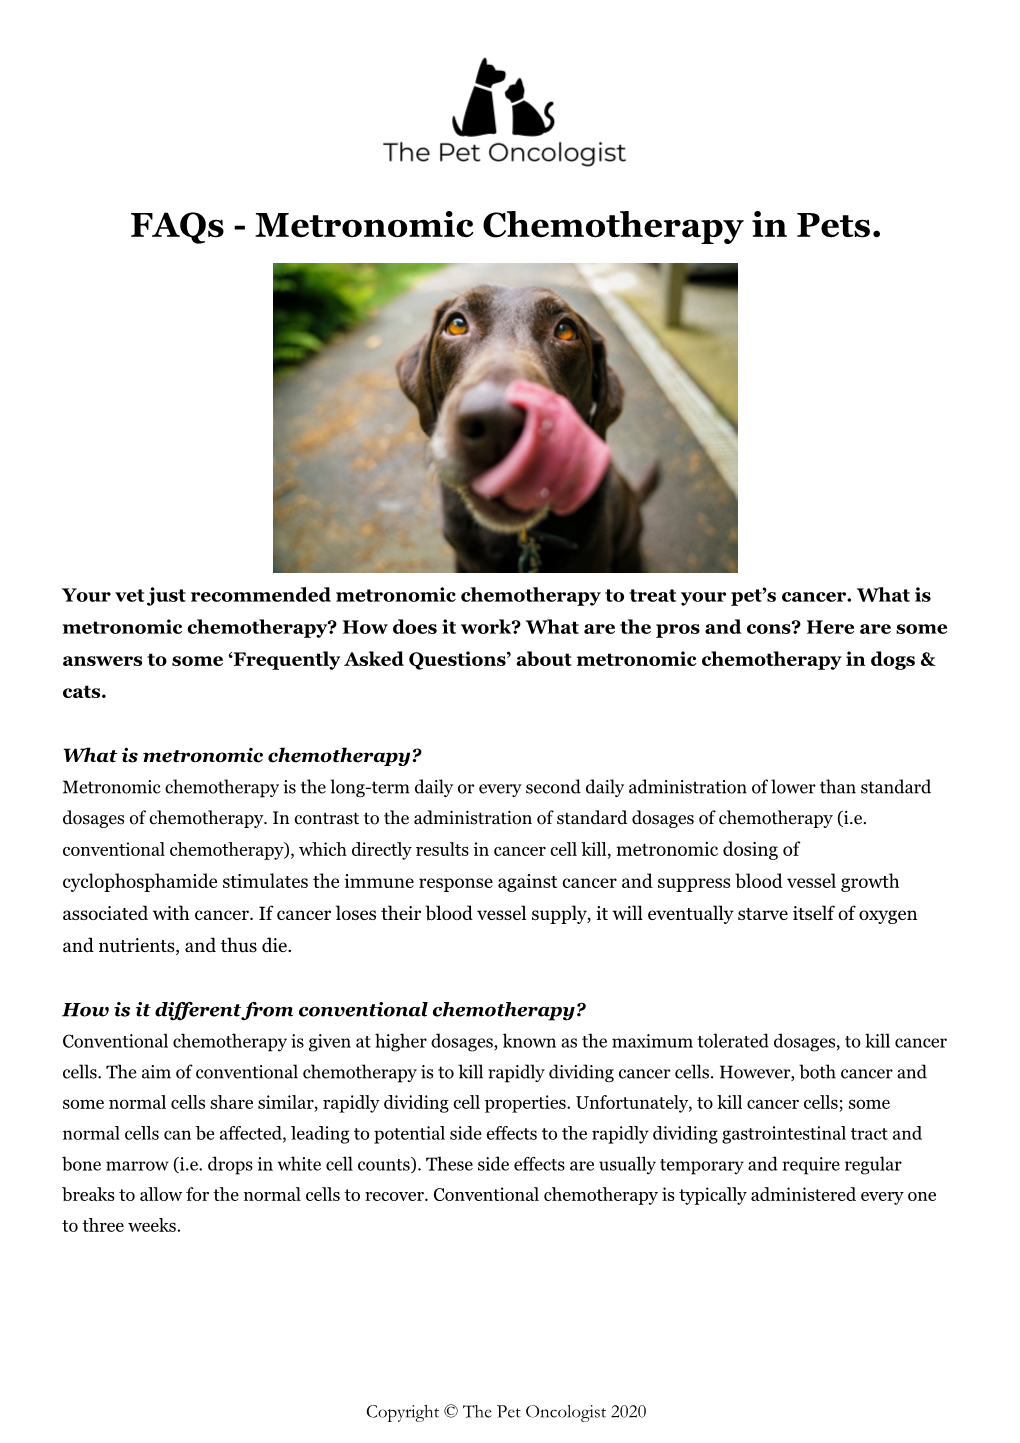 Metronomic Chemotherapy in Pets